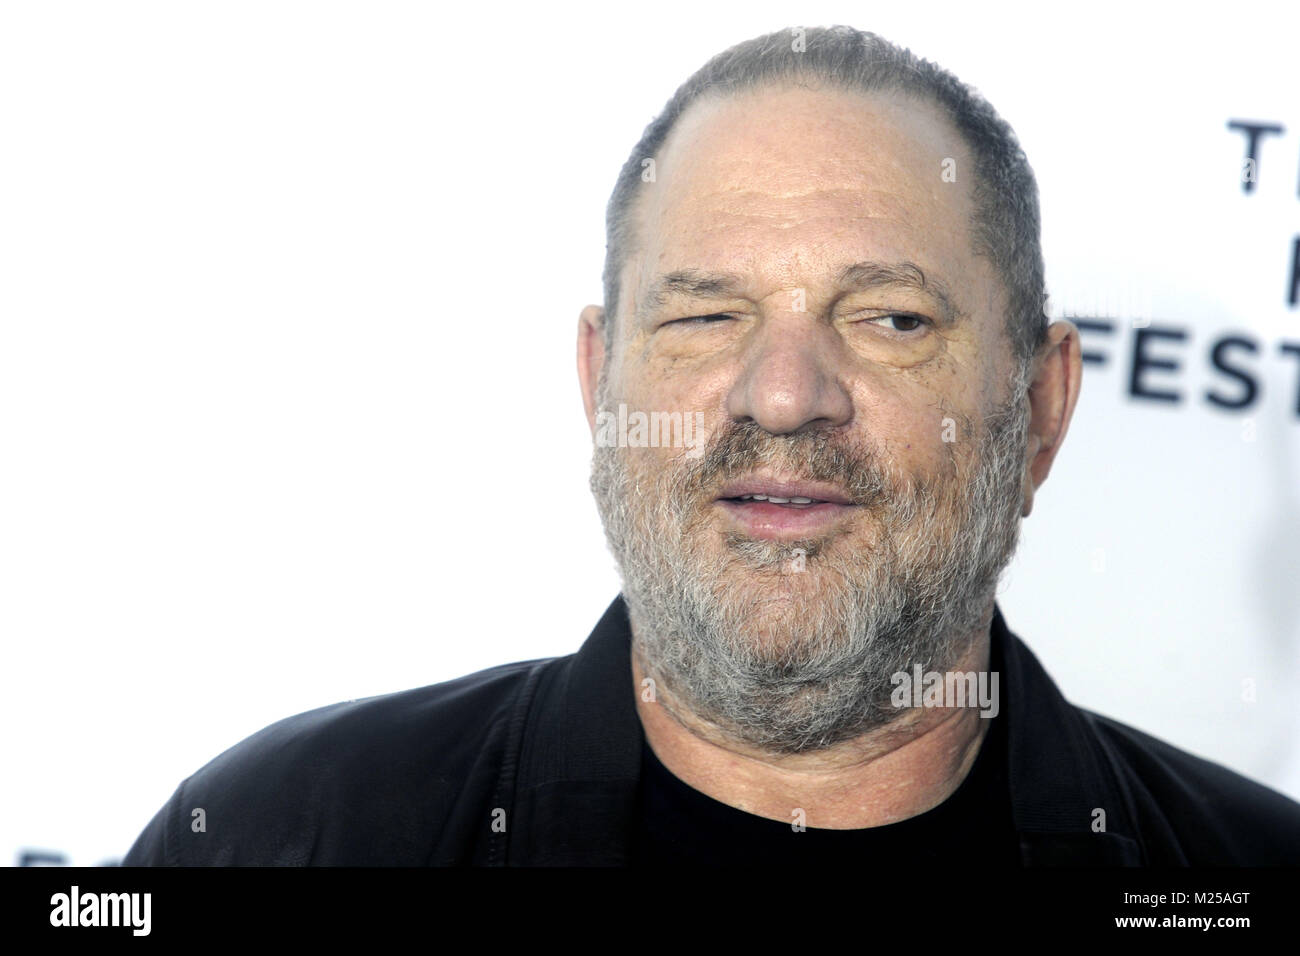 Harvey Weinstein attends the 'Reservoir Dogs' 25th Anniversary Screening during 2017 Tribeca Film Festival at The Beacon Theatre on April 28, 2017 in New York City. | usage worldwide Stock Photo